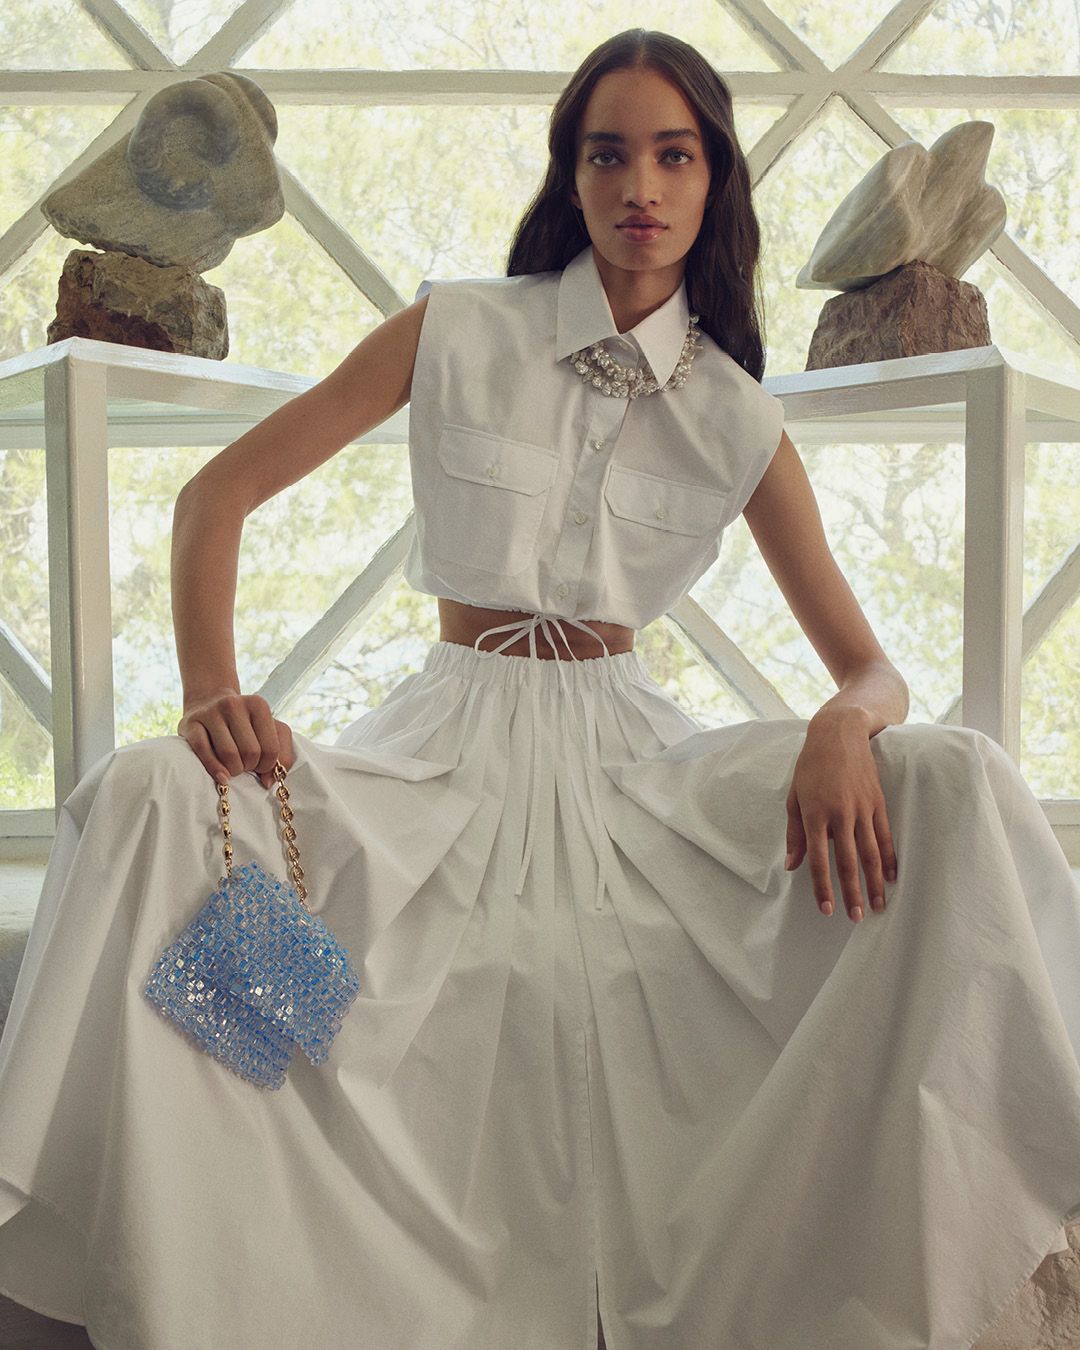 Model sitting wearing a coordinating cropped white shirt and long skirt, holding a baby blue beaded bag